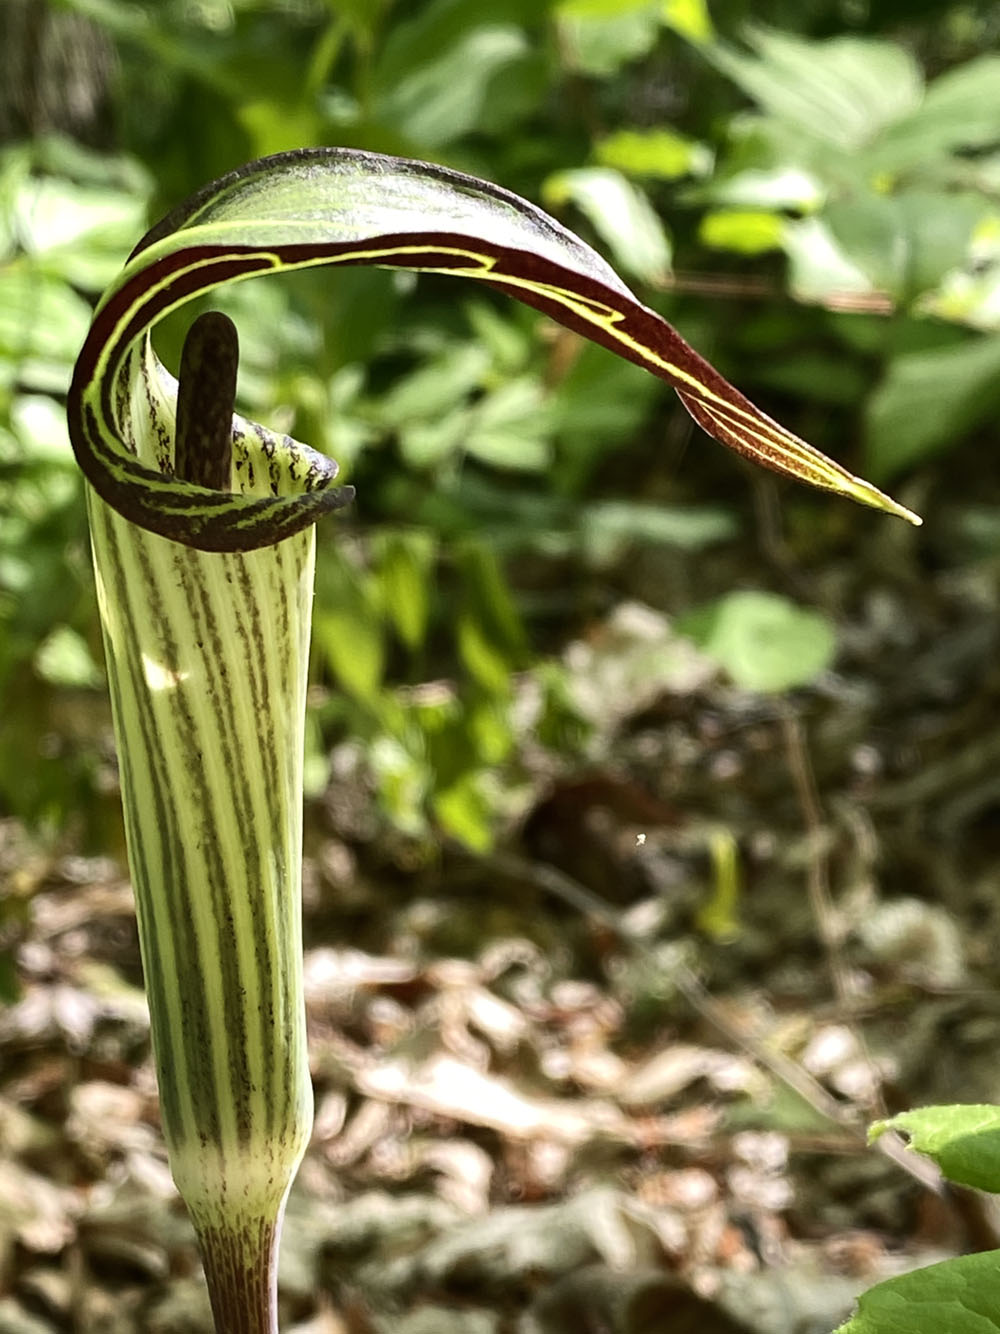 Jack-in-the-pulpit, North American wildflower